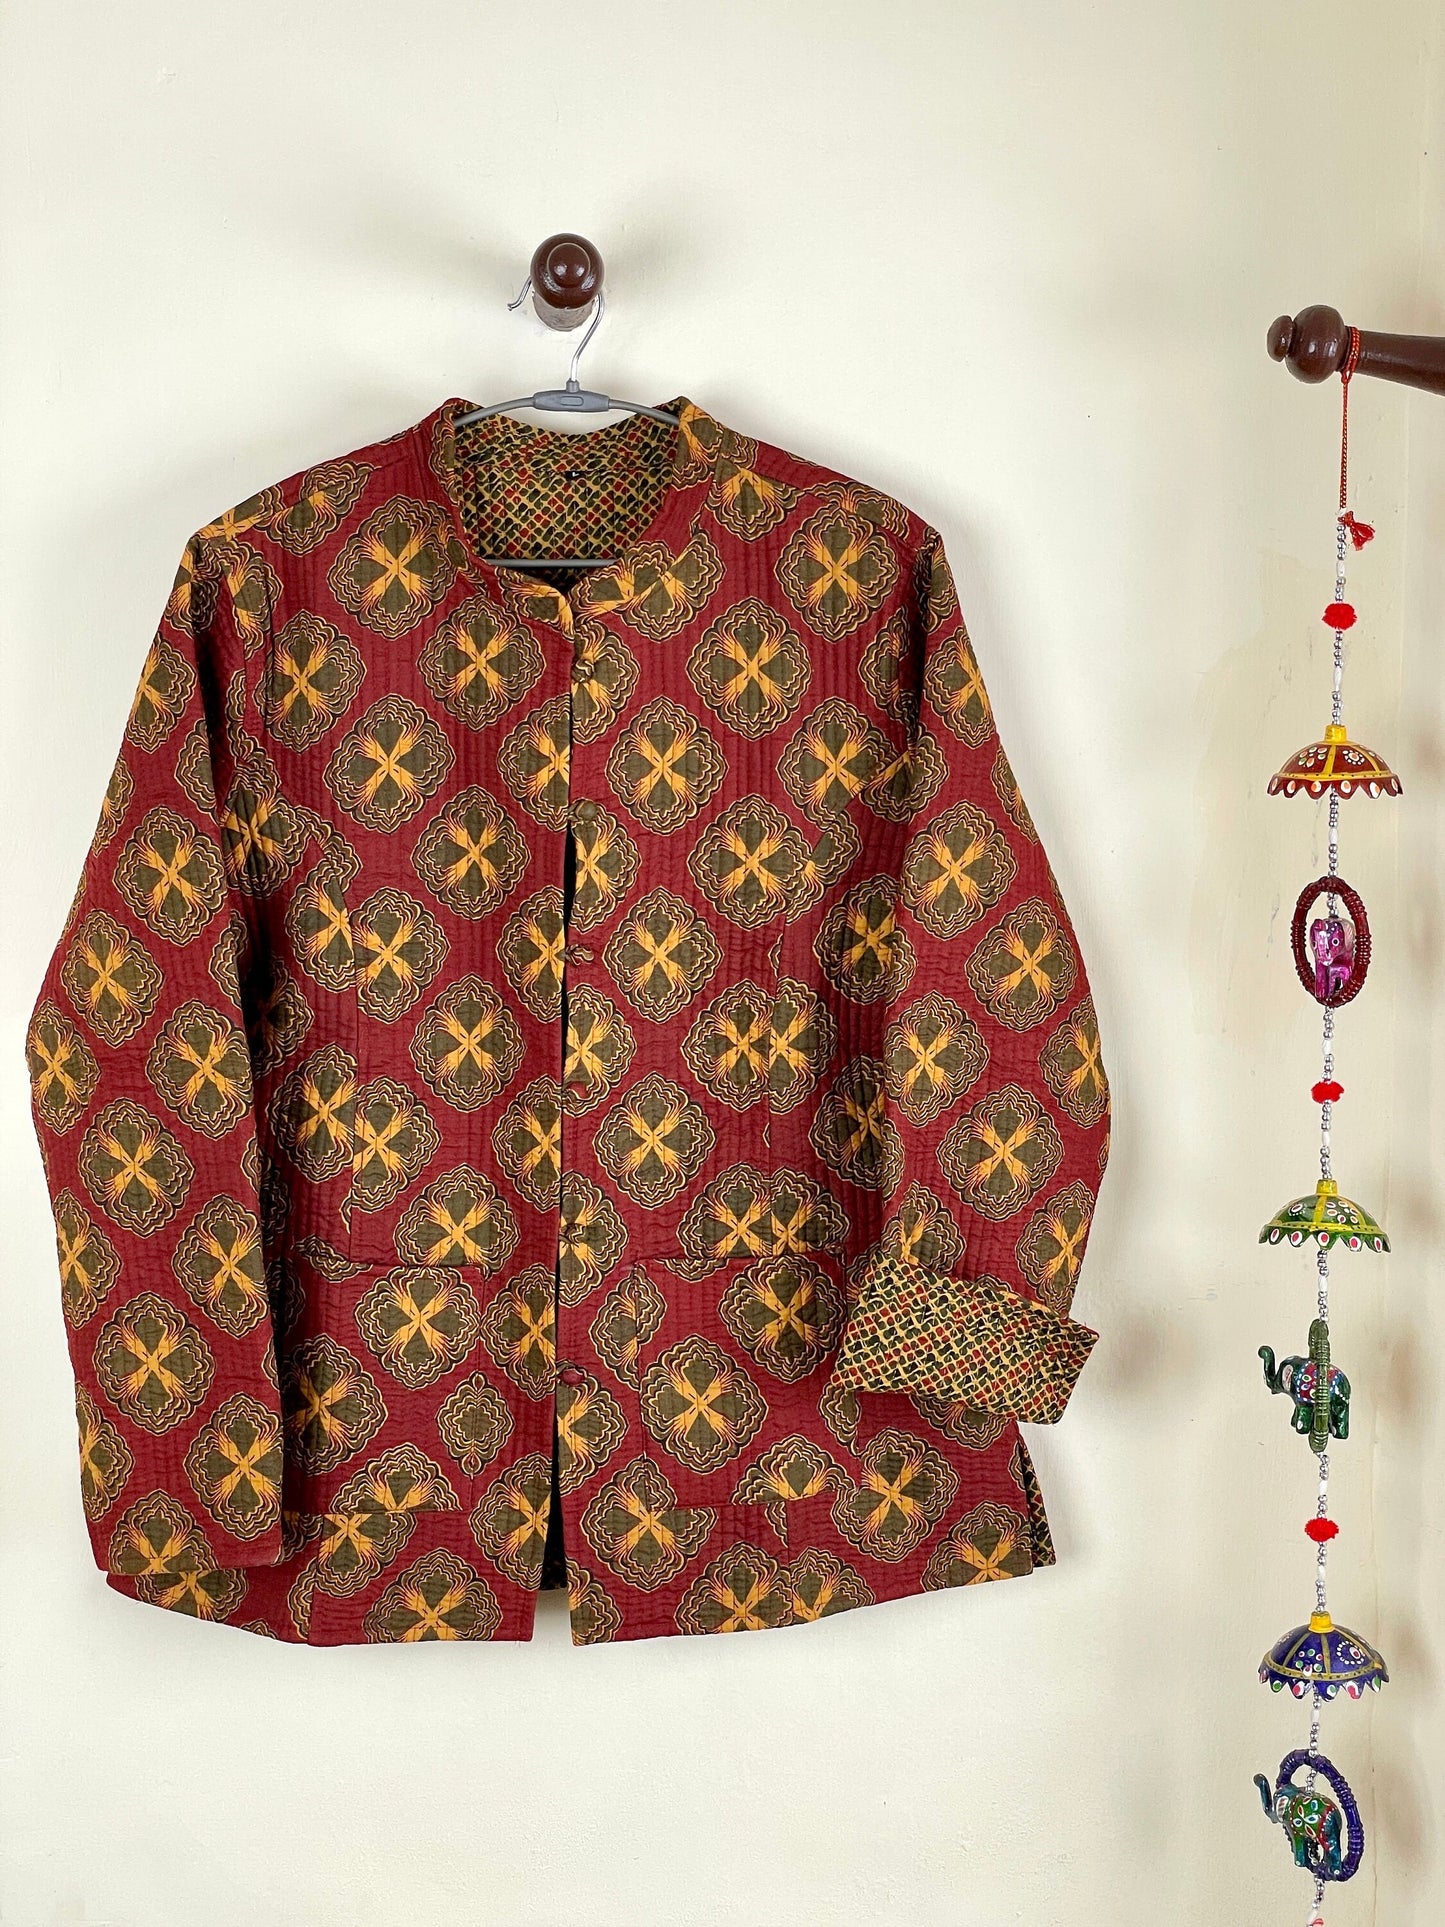 Indian Handmade Quilted Cotton Fabric Jacket Stylish Red & Yellow Bohemian Women's Coat, Reversible Waistcoat for Her